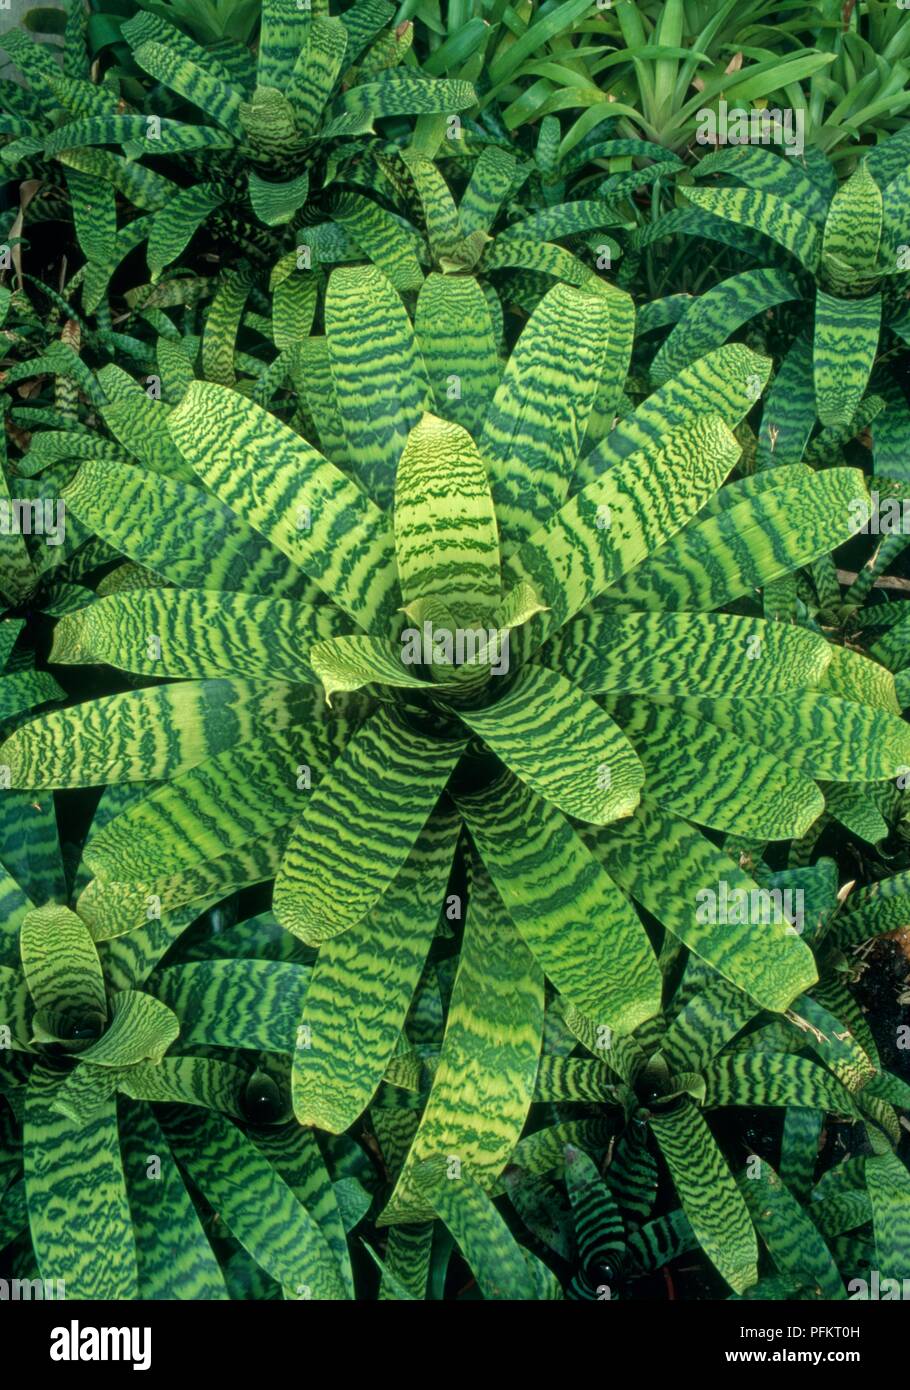 Vriesea hieroglyphica, a type of bromeliad with striped green leaves Stock Photo